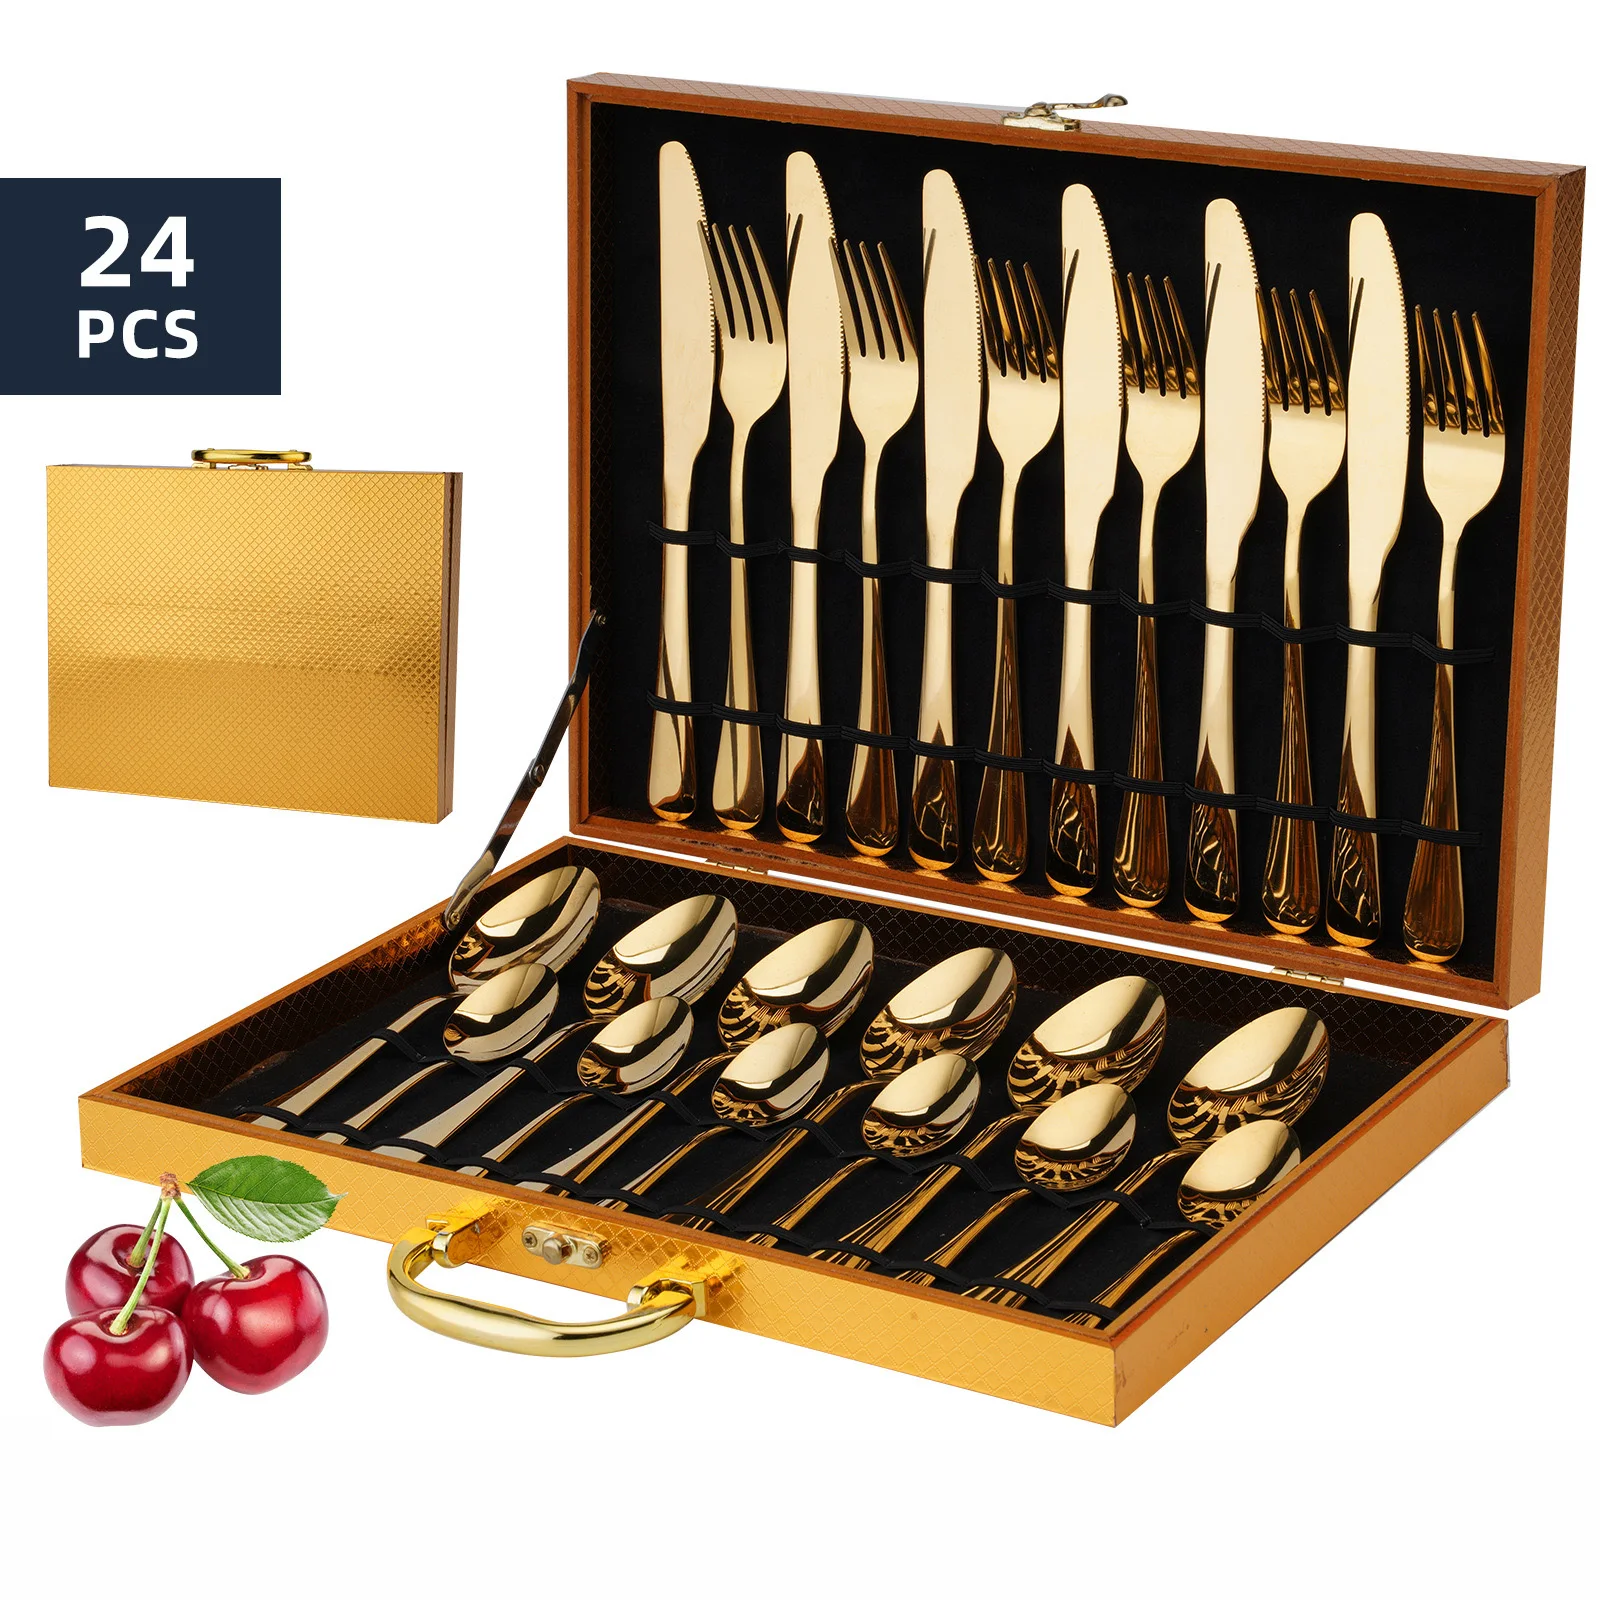 

Amazon Hot Sale 24pcs Silverware Wholesale Gold Cutlery Brass Black Kitchen Knife Spoon Fork Stainless Steel Flatware Set, Silver/ gold/ rose gold/ black/ colorful